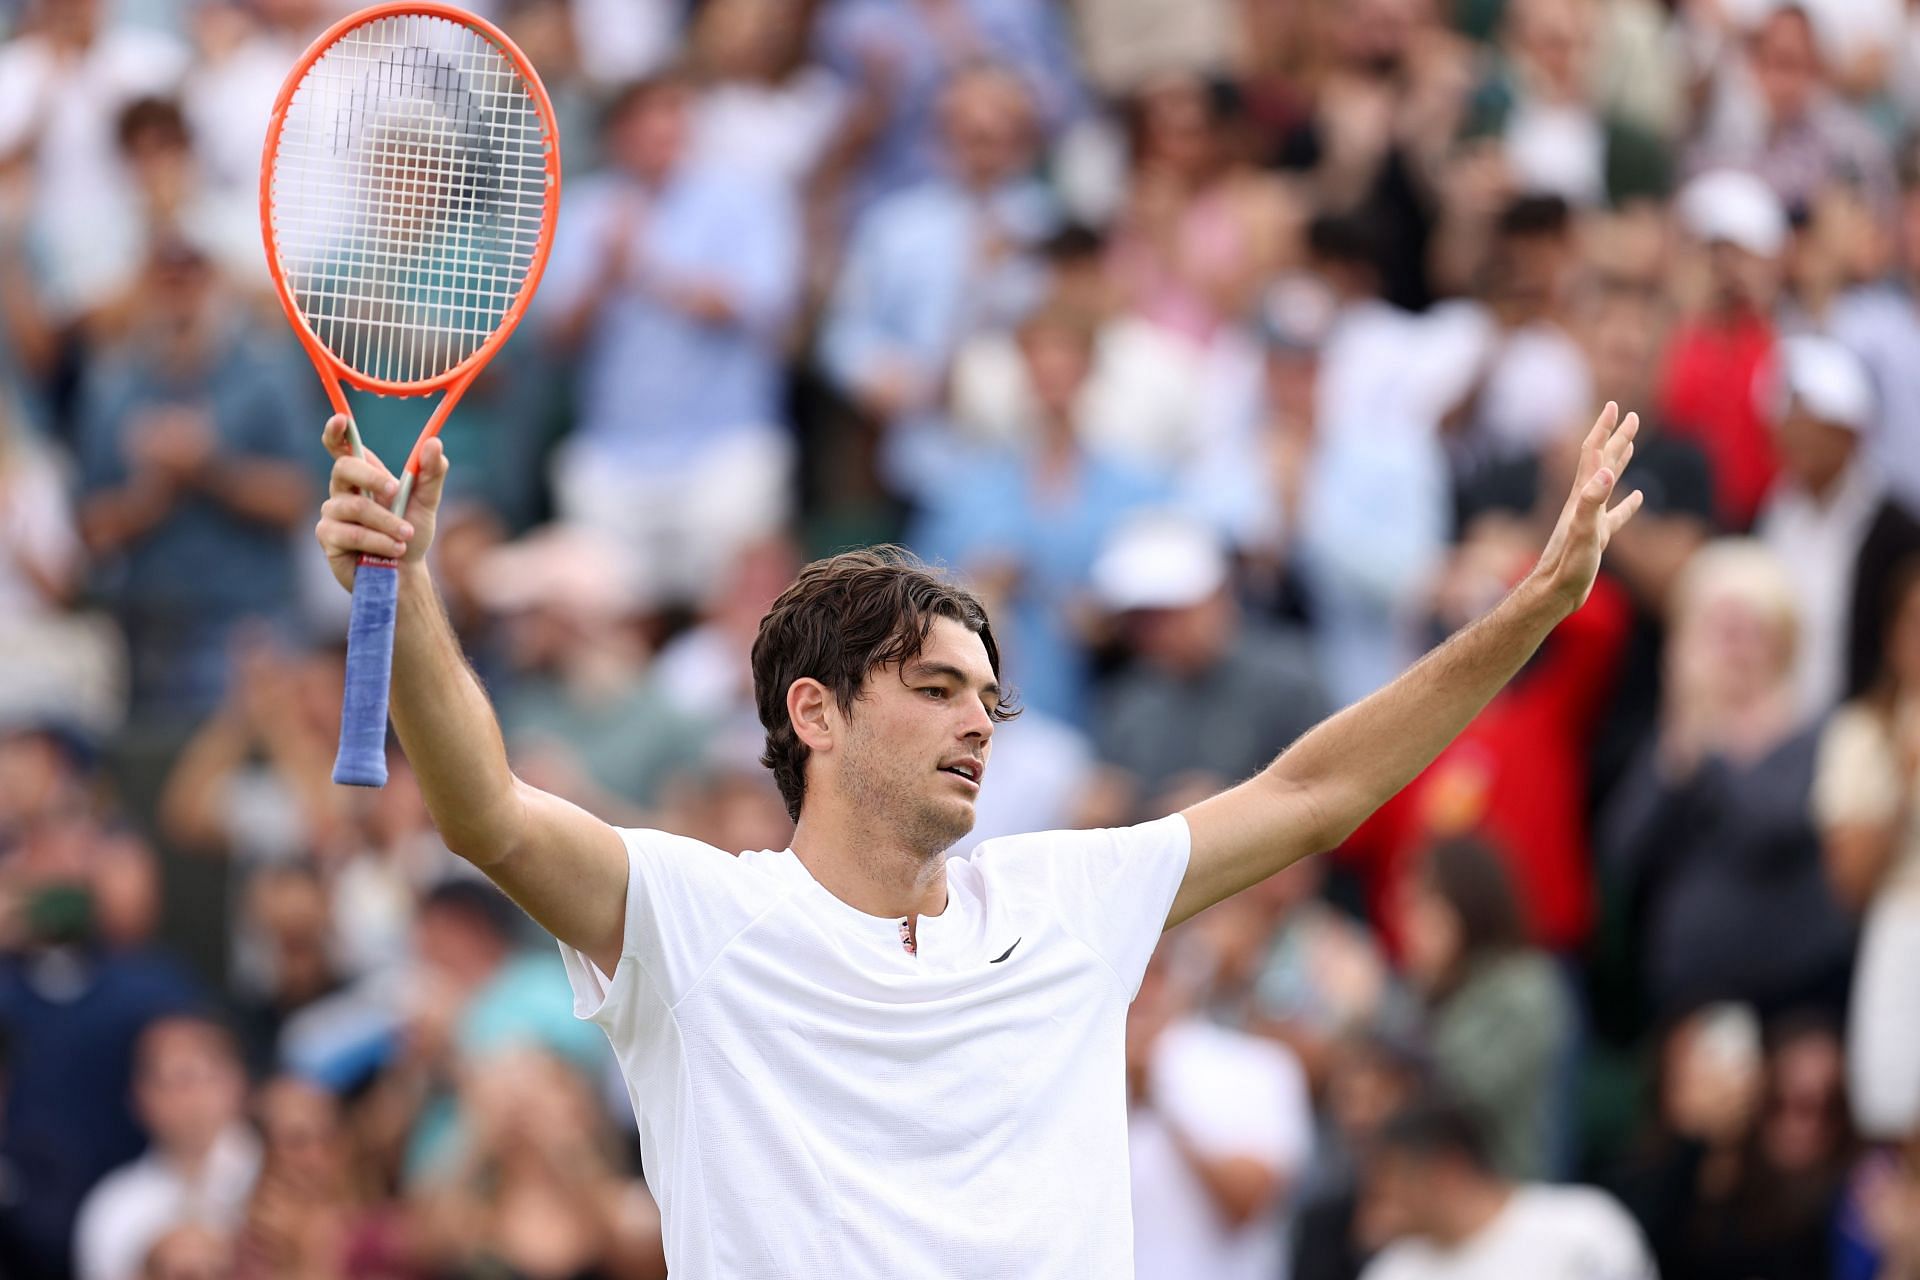 Taylor Fritz will look to reach his first Grand Slam quarterfinal